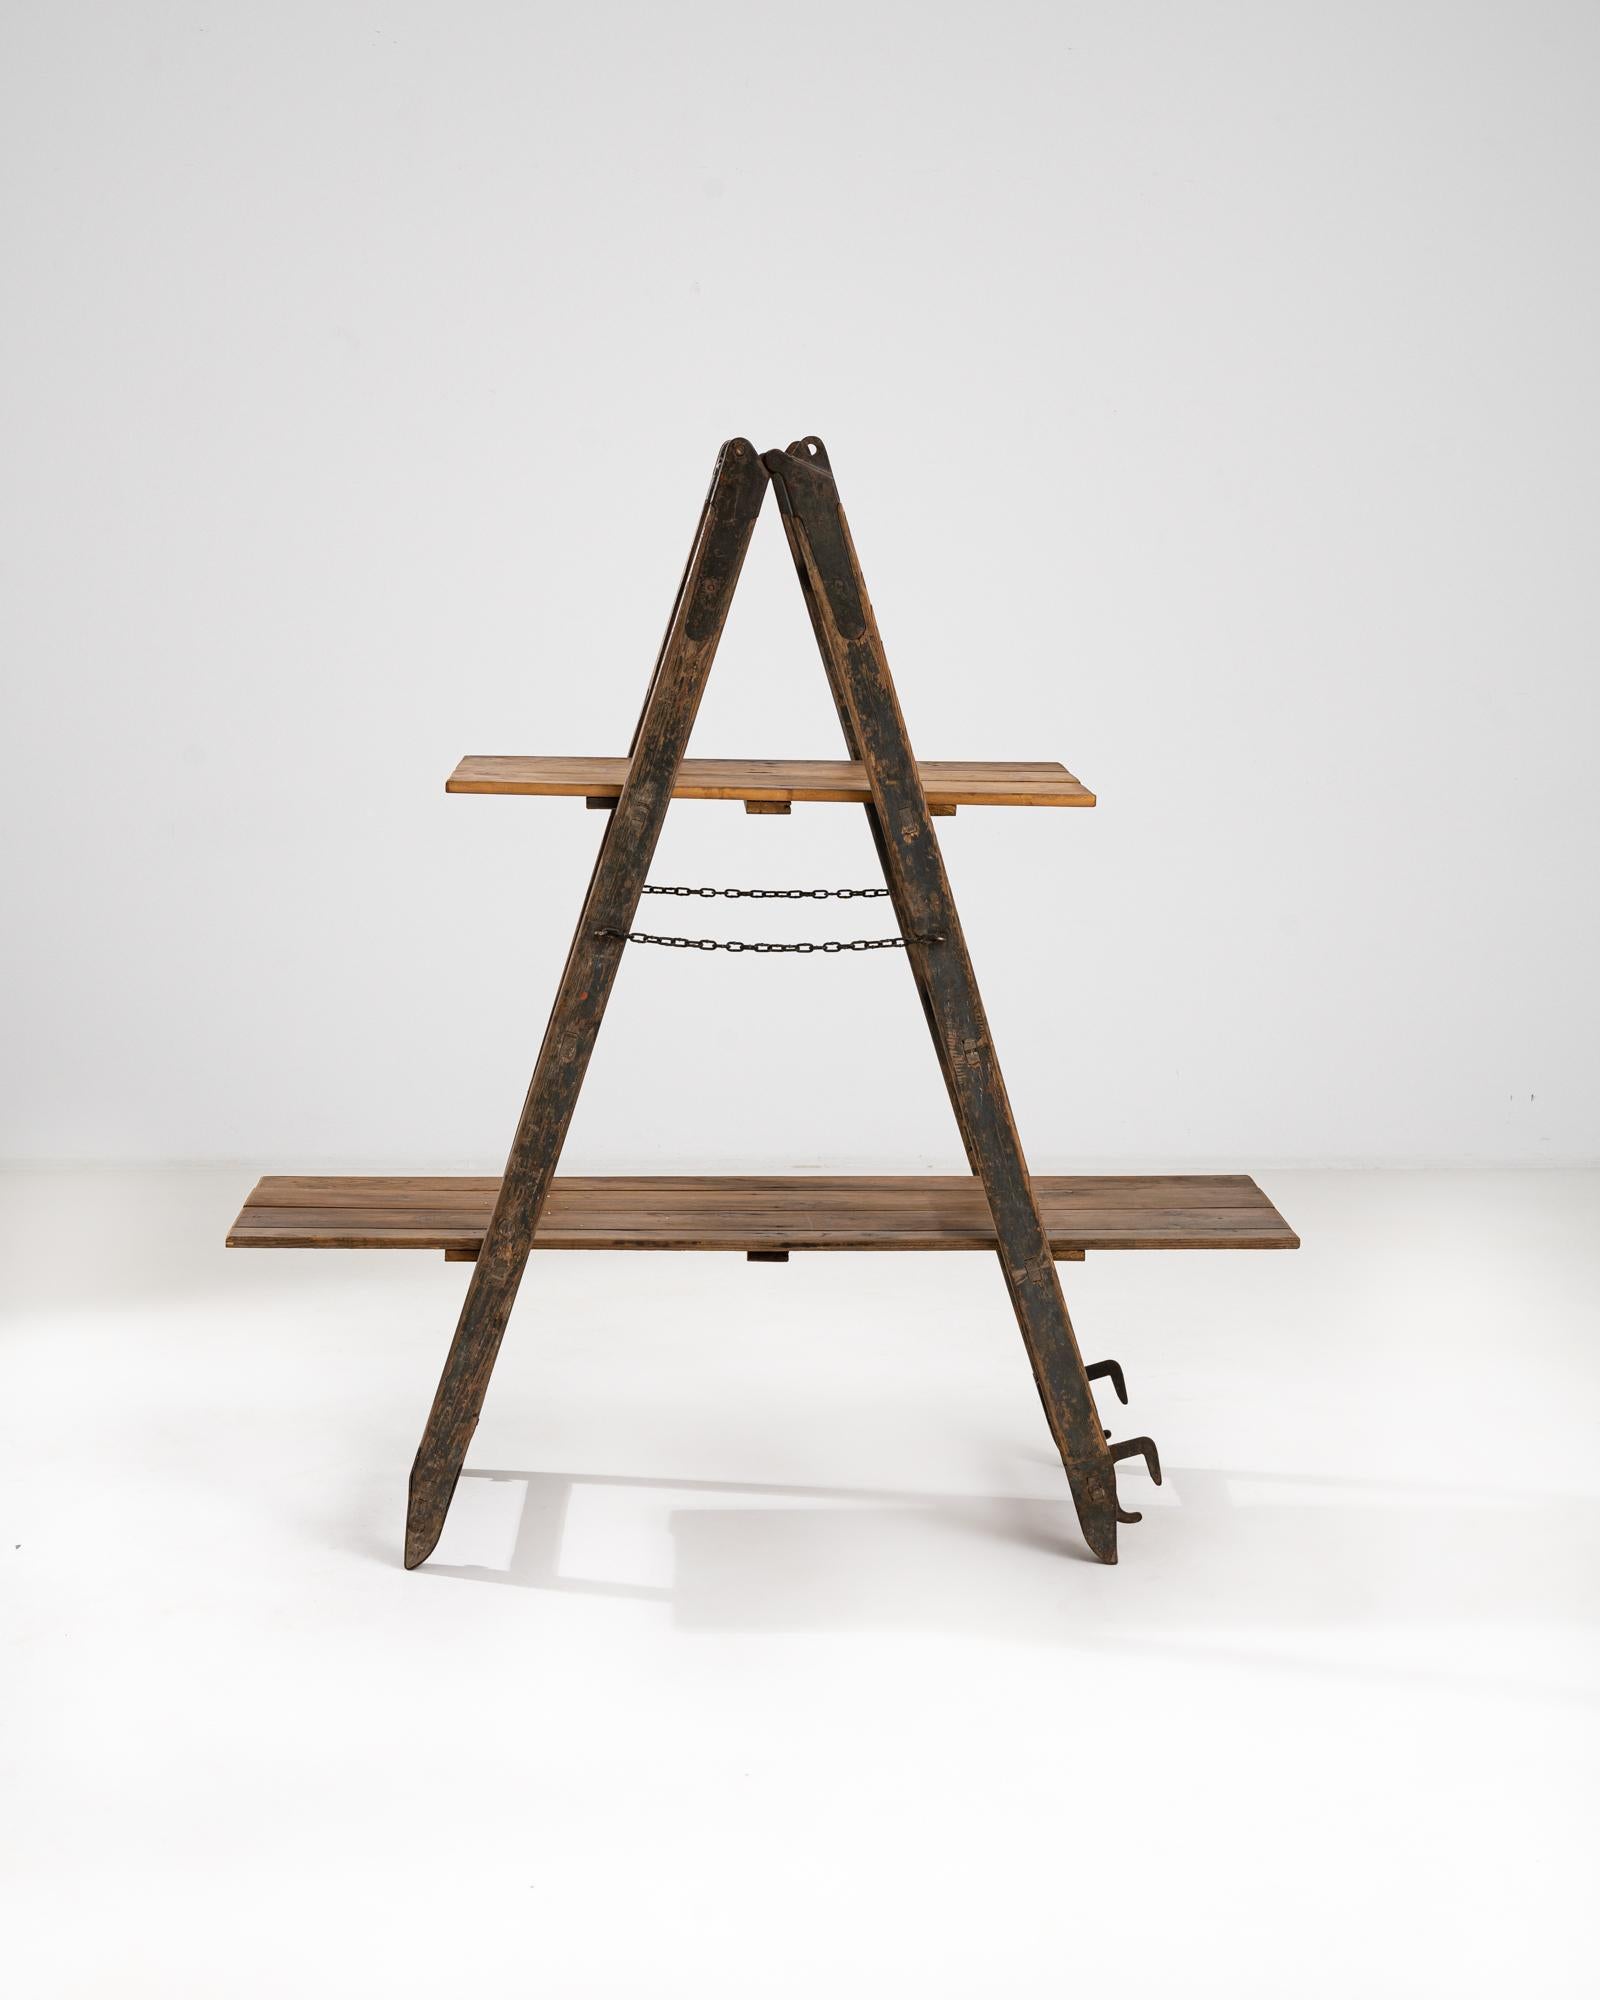 A vintage ladder from early 20th Century France, refigured into a two level shelving unit. Conjuring images of bricolage, this time-traveled object displays a nostalgic patina; scuffs and dings, drips of paint record the telltale stories of projects